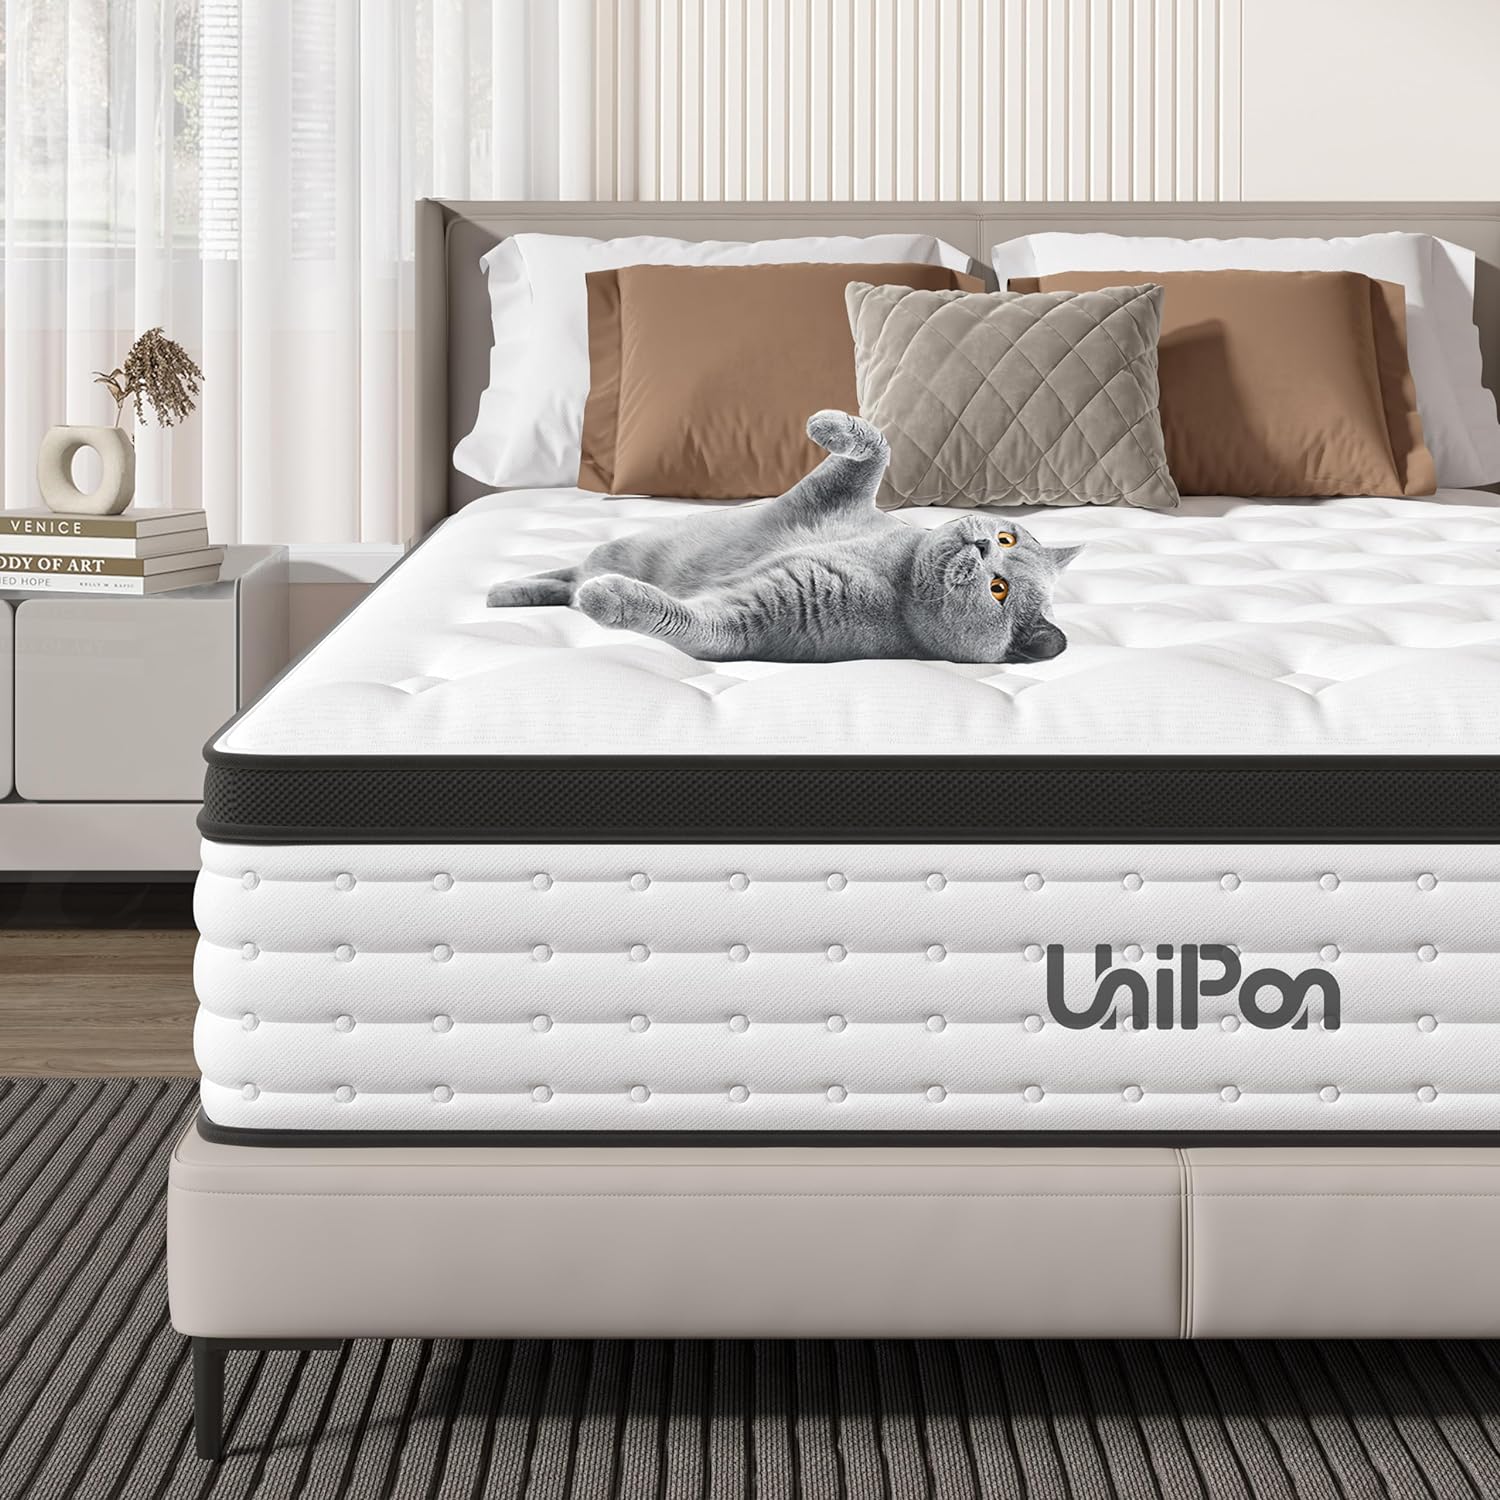 UniPon 12 Inch Hybrid Mattress Full, Spring Mattress with Gel Memory Foam, Medium Firm Mattress, Made in USA, Supportive Individually Pocket Spring Mattress, Bed in a Box, Pressure Relief